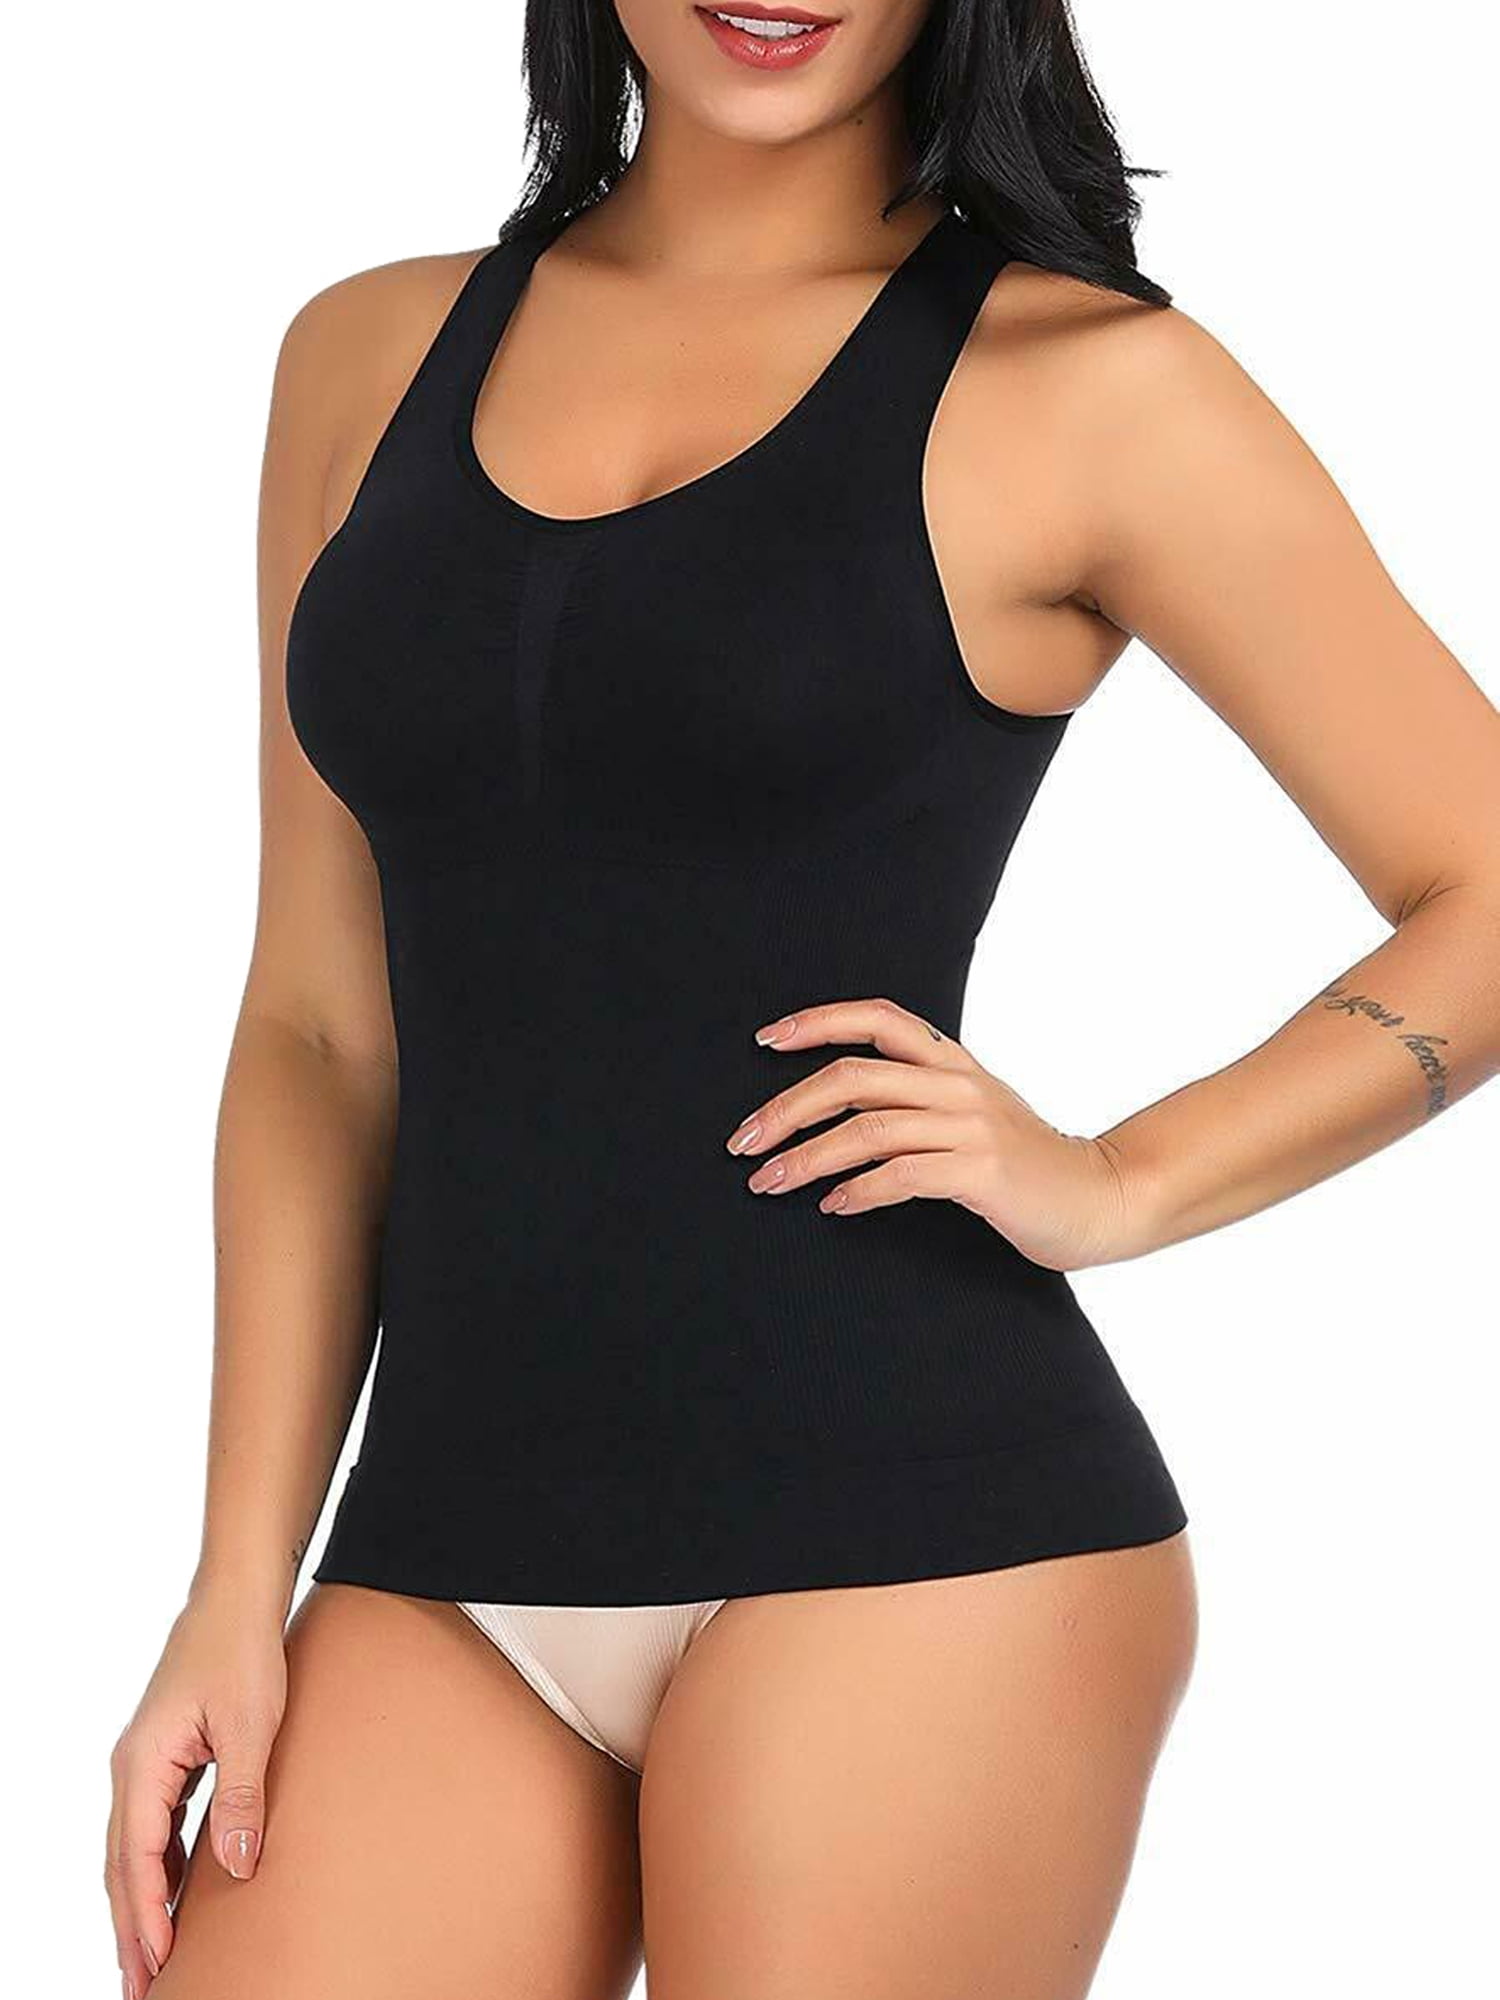 QRIC Tummy Control Camisole for Women Shapewear Tank Tops with Built in Bra  Slimming Compression Top Vest Seamless Body Shaper 